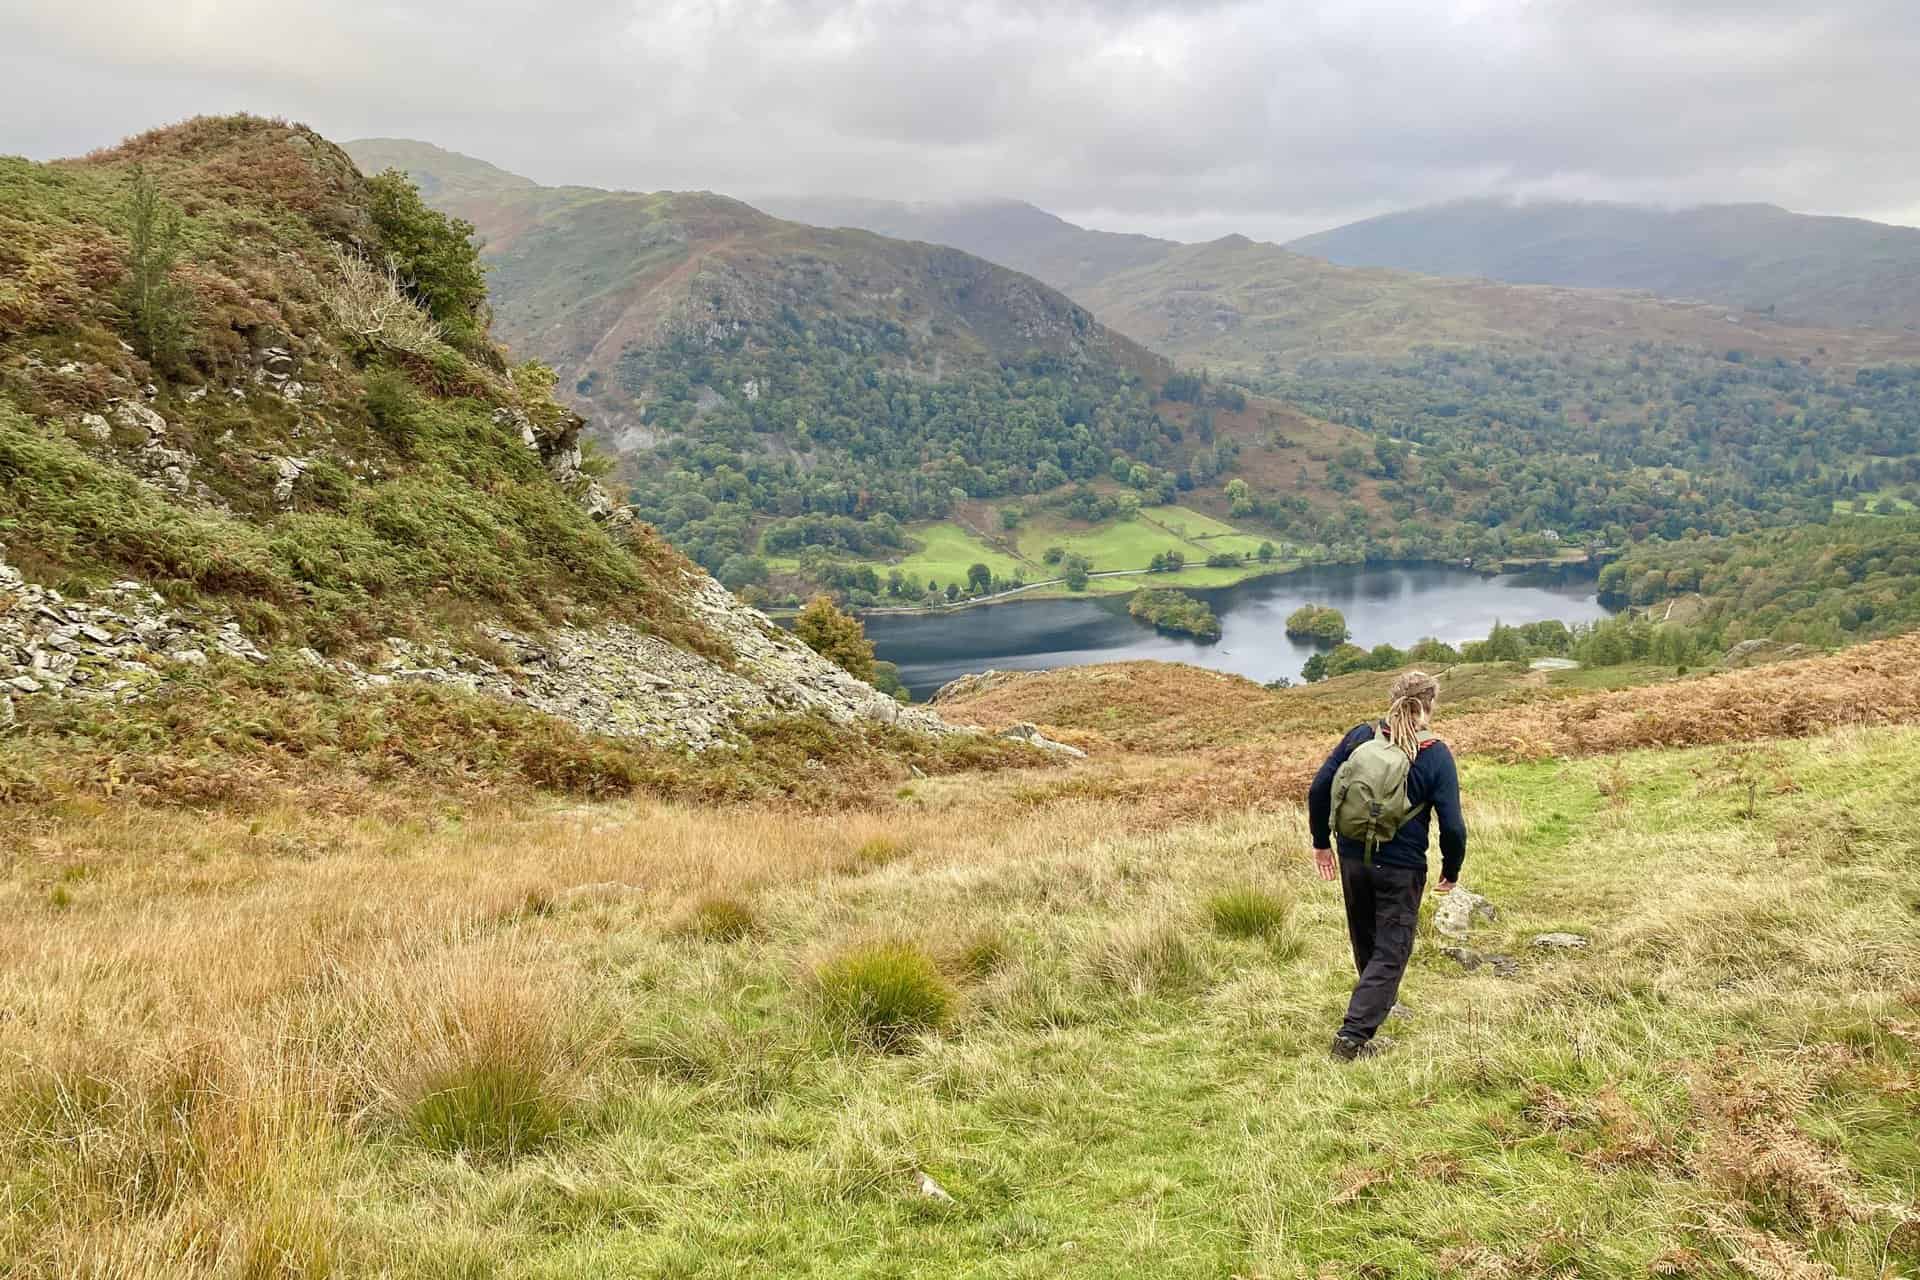 One of the paths off Loughrigg Fell on the east side of Ewe Crag. The lake at the bottom is Rydal Water, home to Heron Island (left) and Little Isle (right).